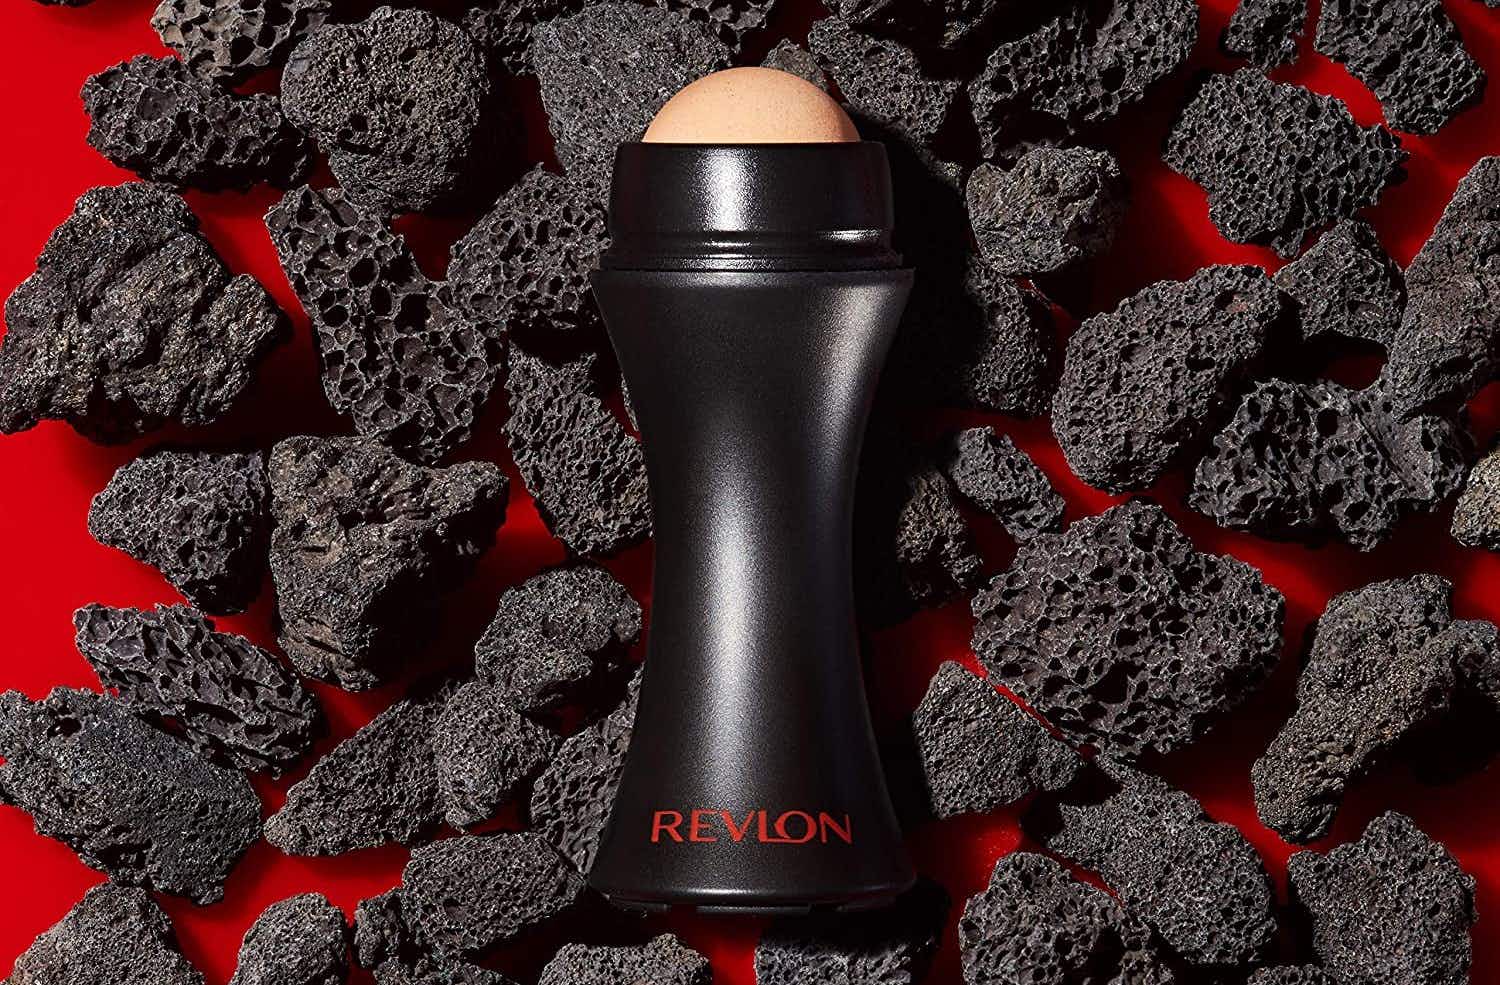 A Revlon volcanic face roller laid on top of volcanic rocks